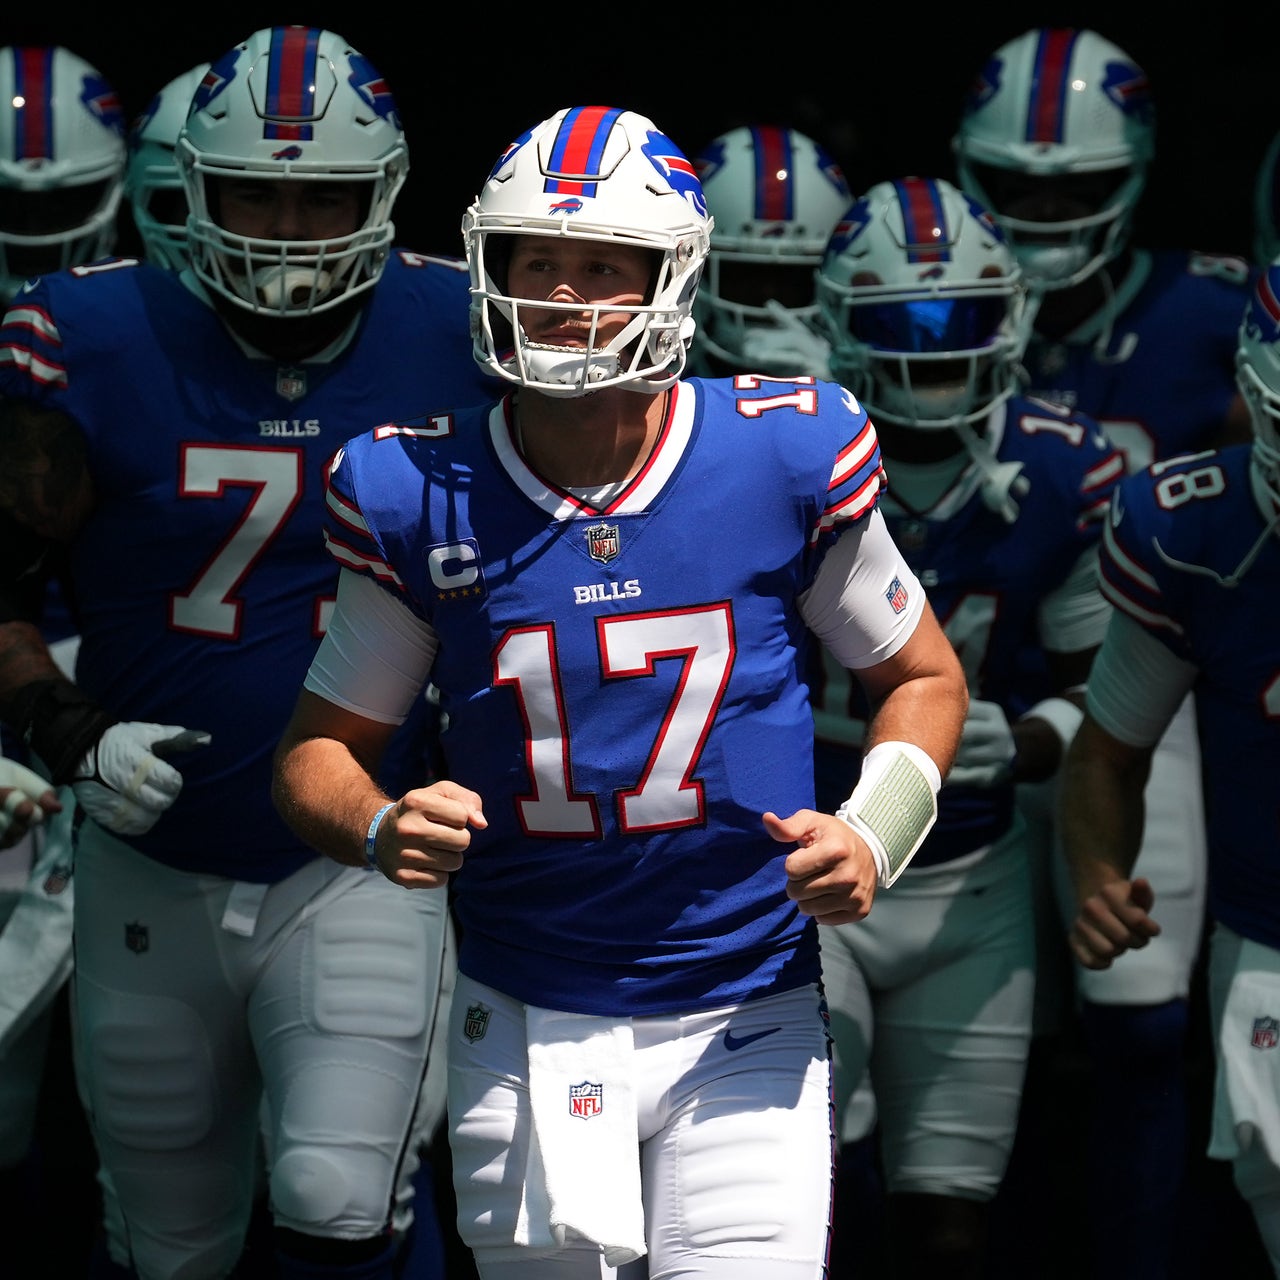 Monday Night Football: Jets-Bills betting preview (odds, lines, best bets), NFL News, Rankings and Statistics